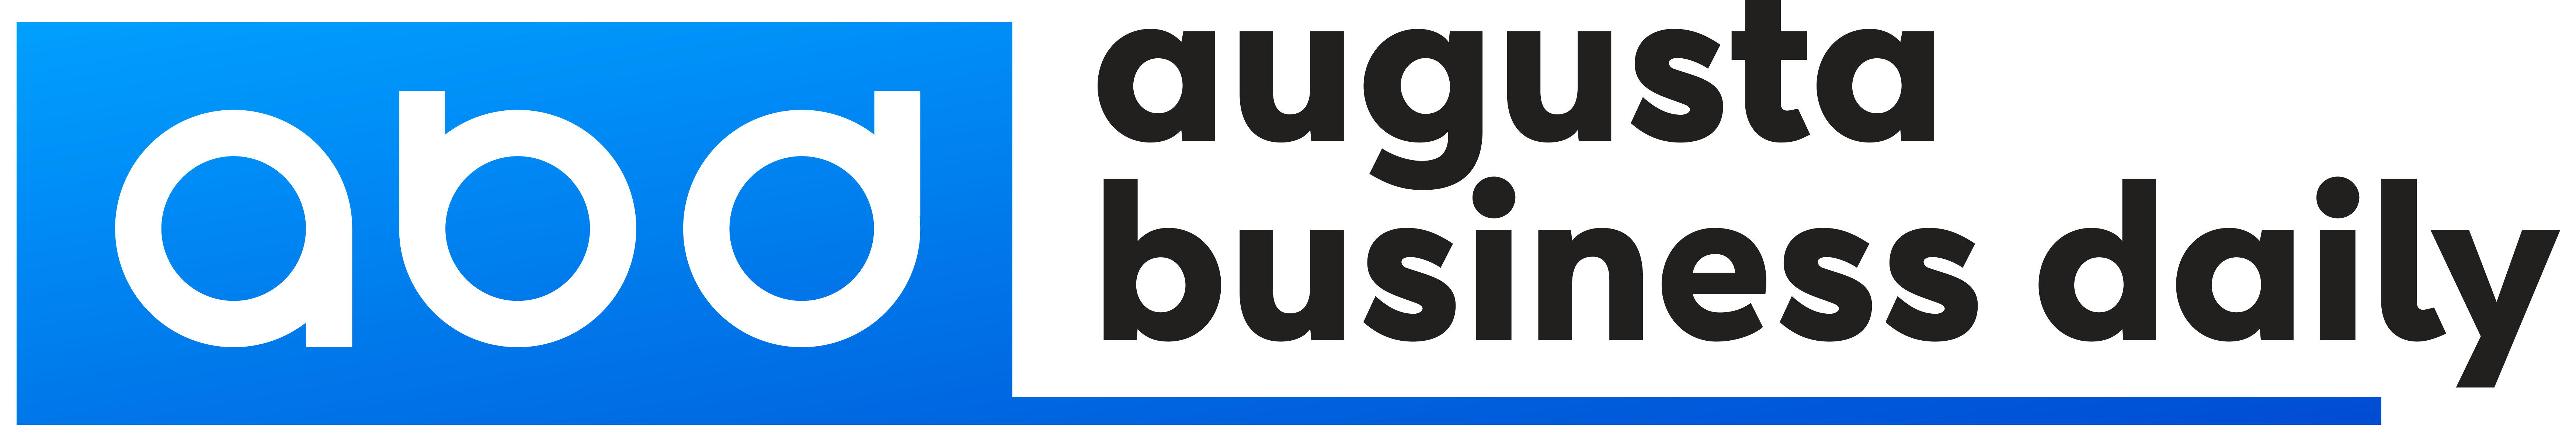 Augusta Business Daily